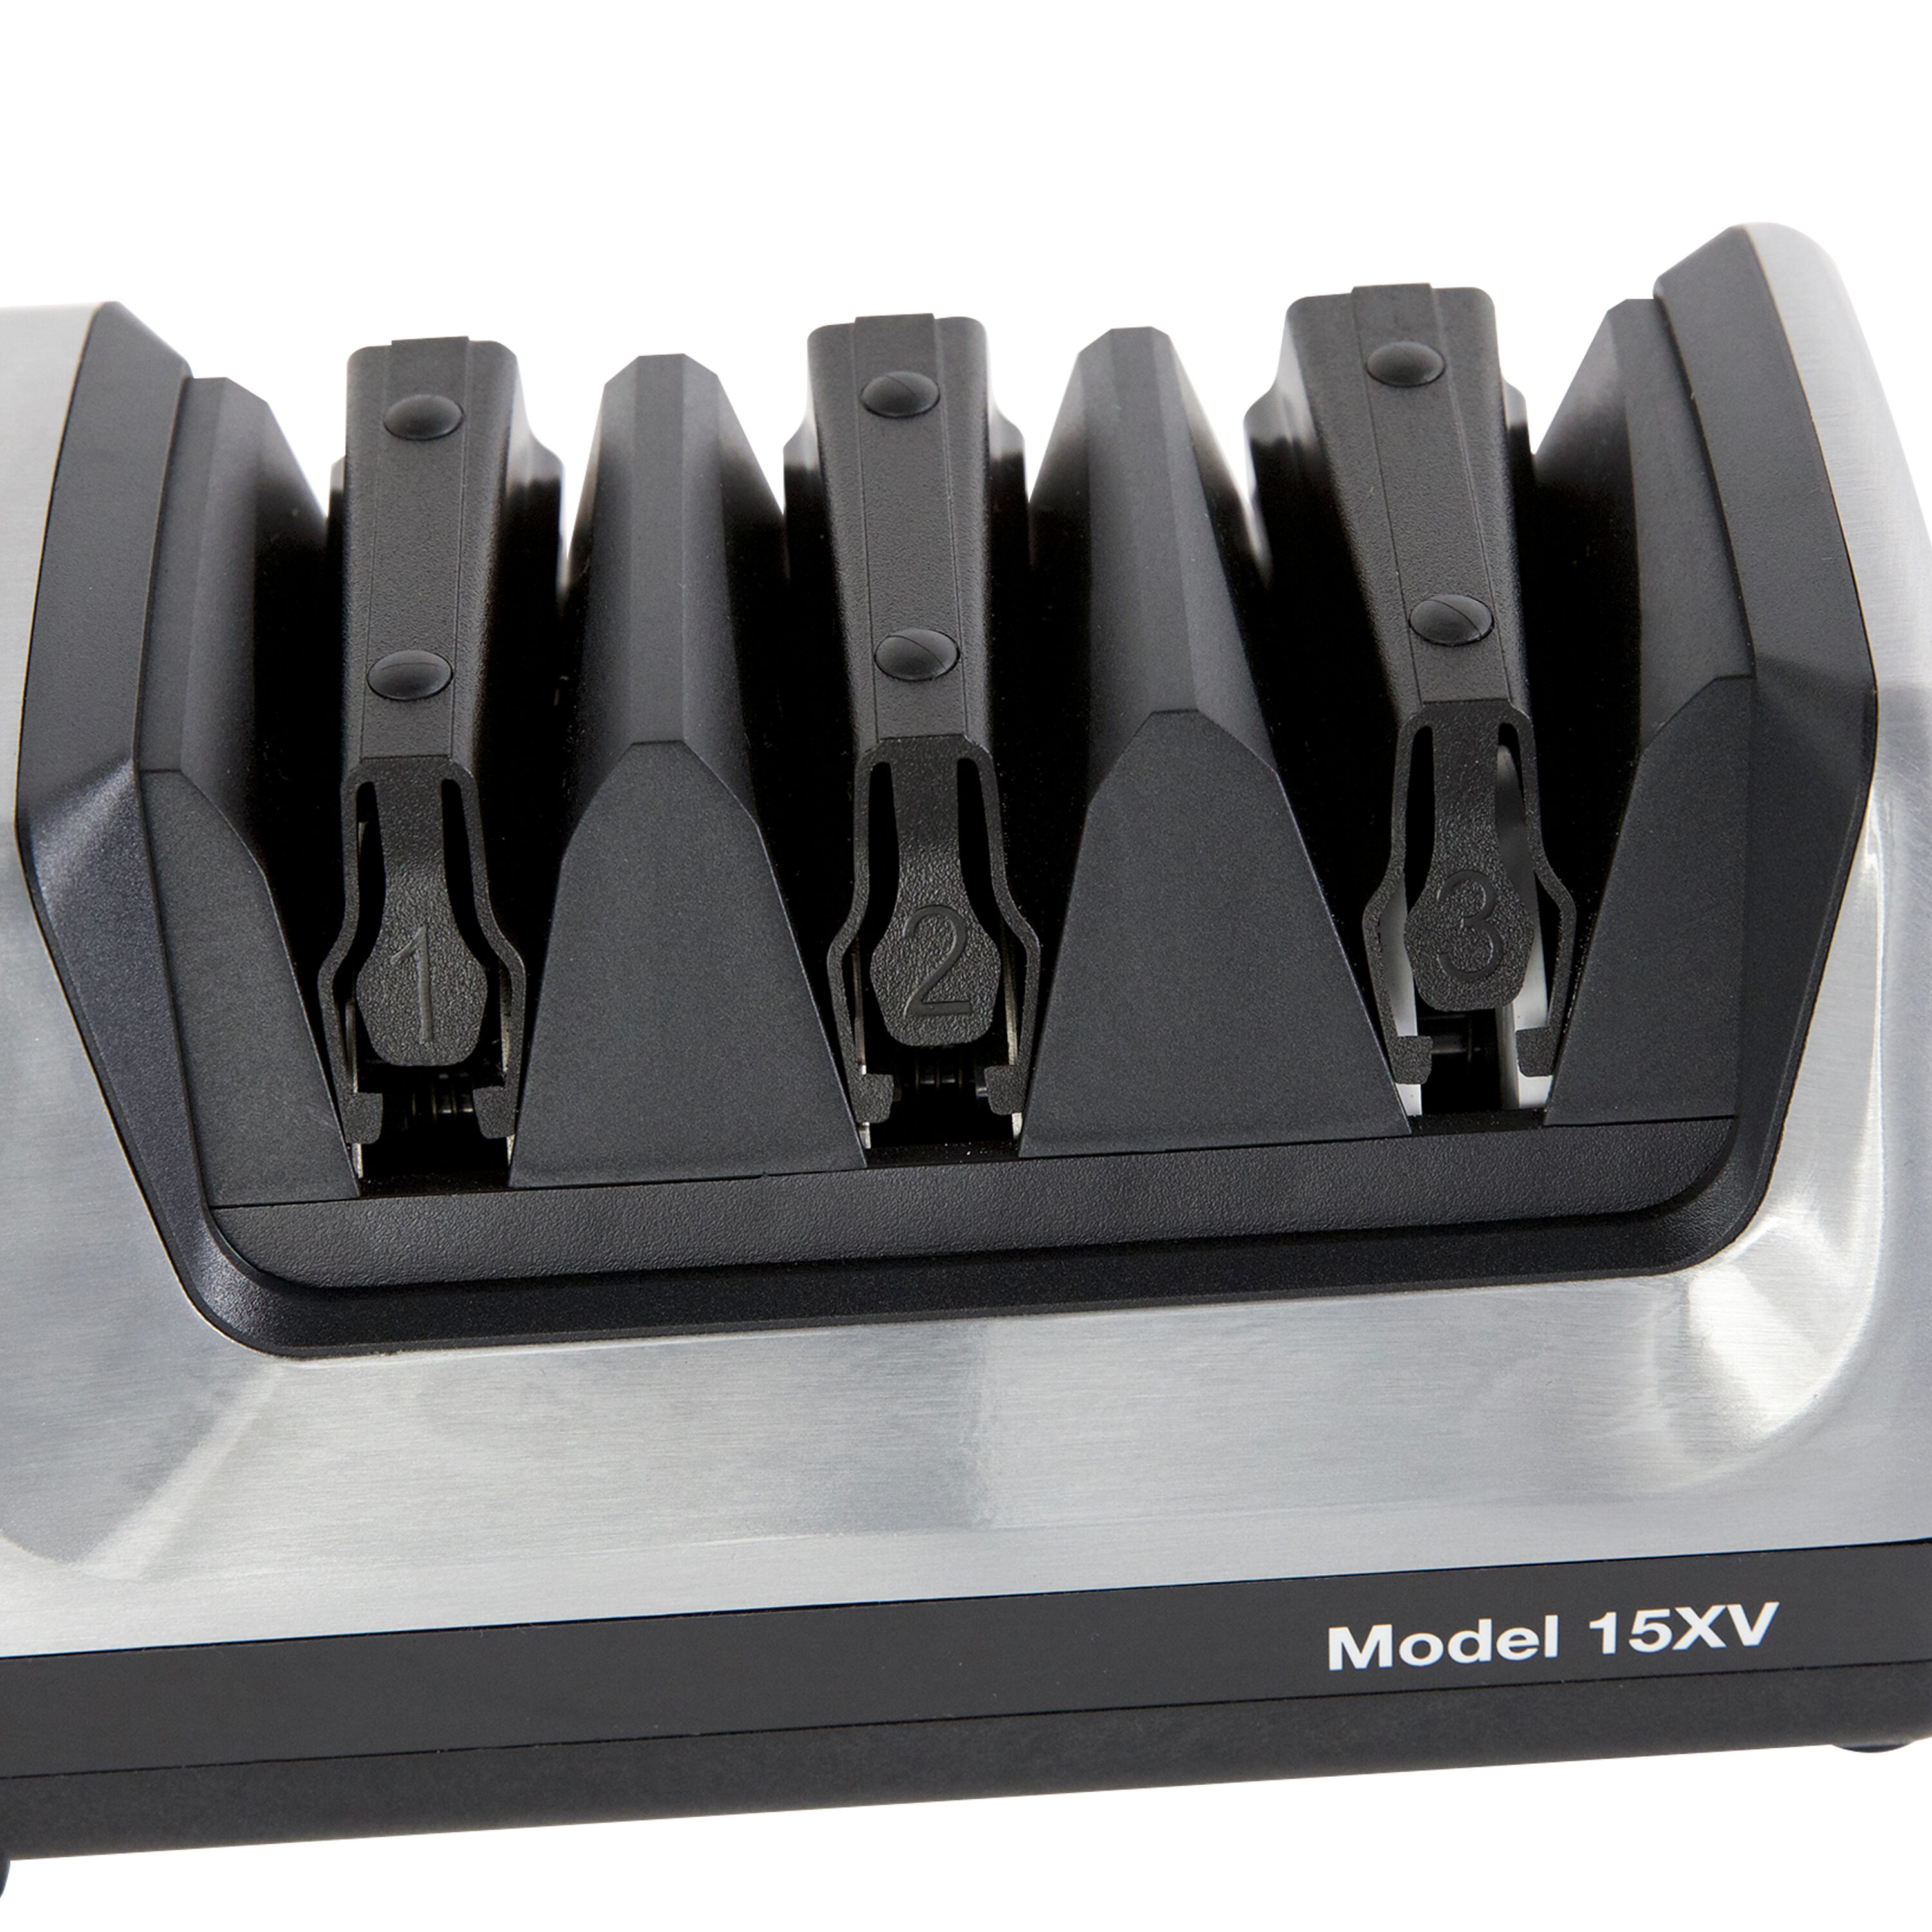 Chef's Choice Trizor 15XV Review: The Ultimate Electric Kitchen Knife  Sharpener 